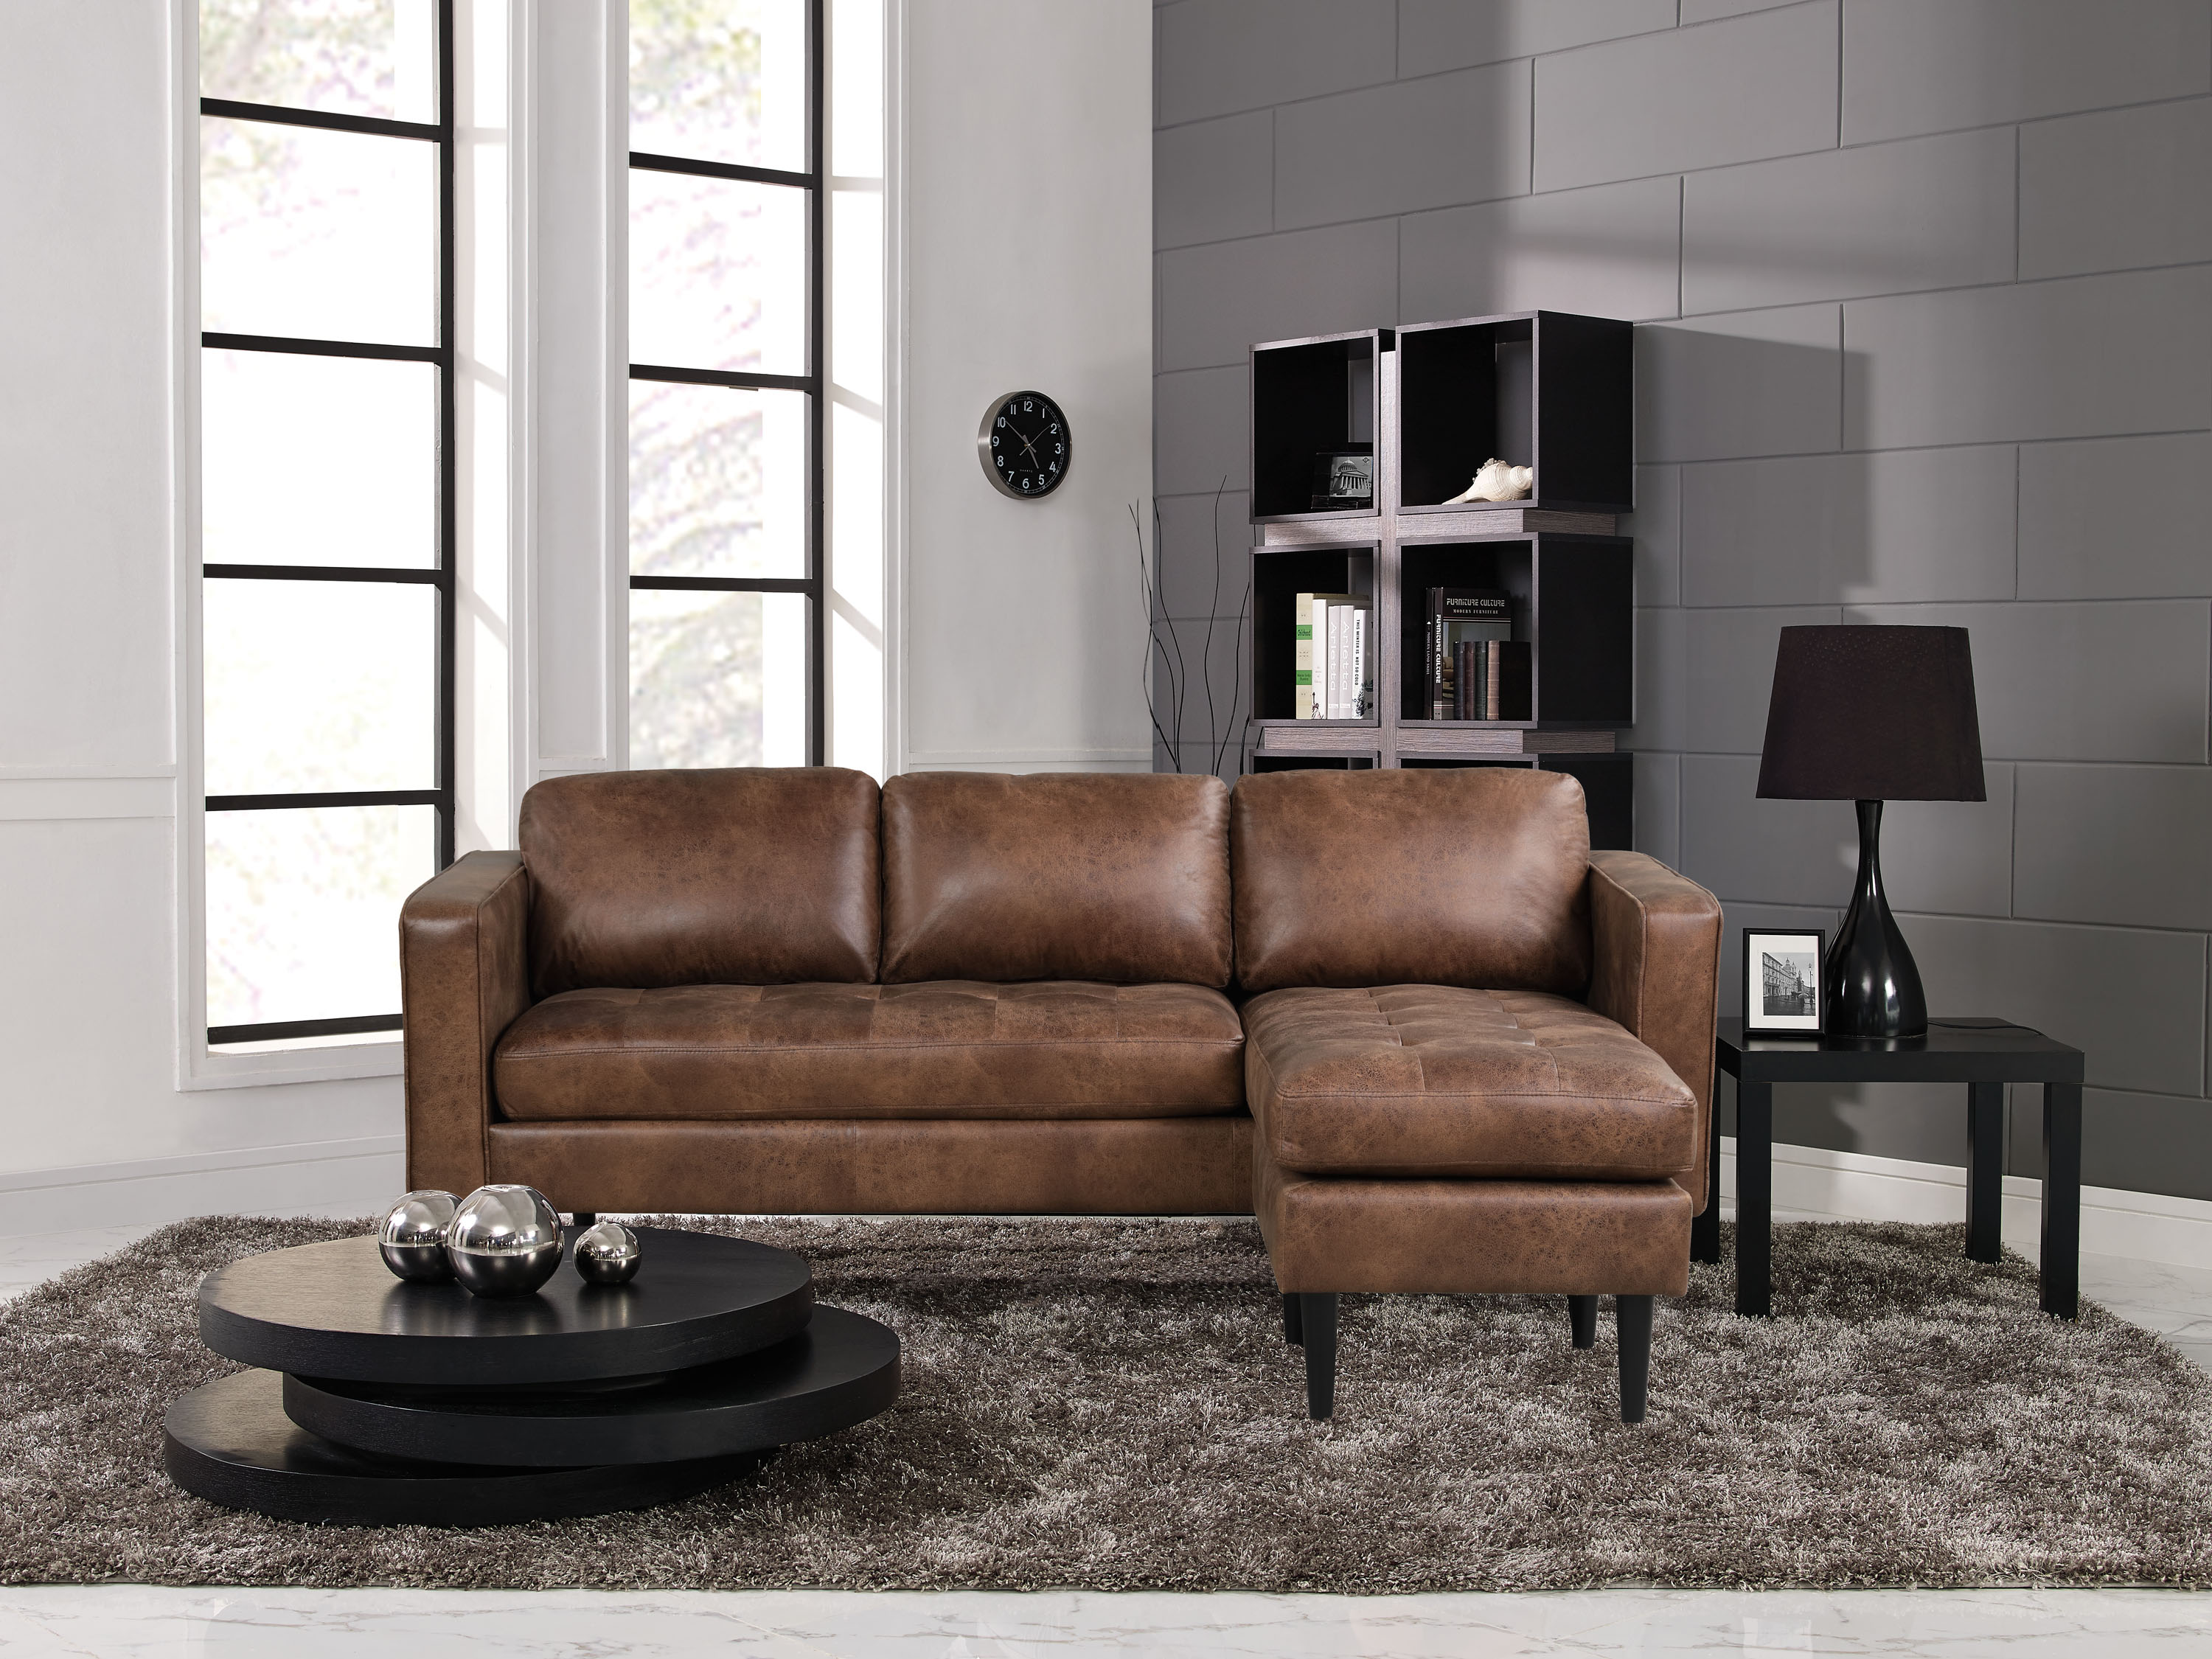 Lifestyle Solutions Manila Modern Sectional Sofa with Chaise, Brown Faux Leather - image 5 of 5